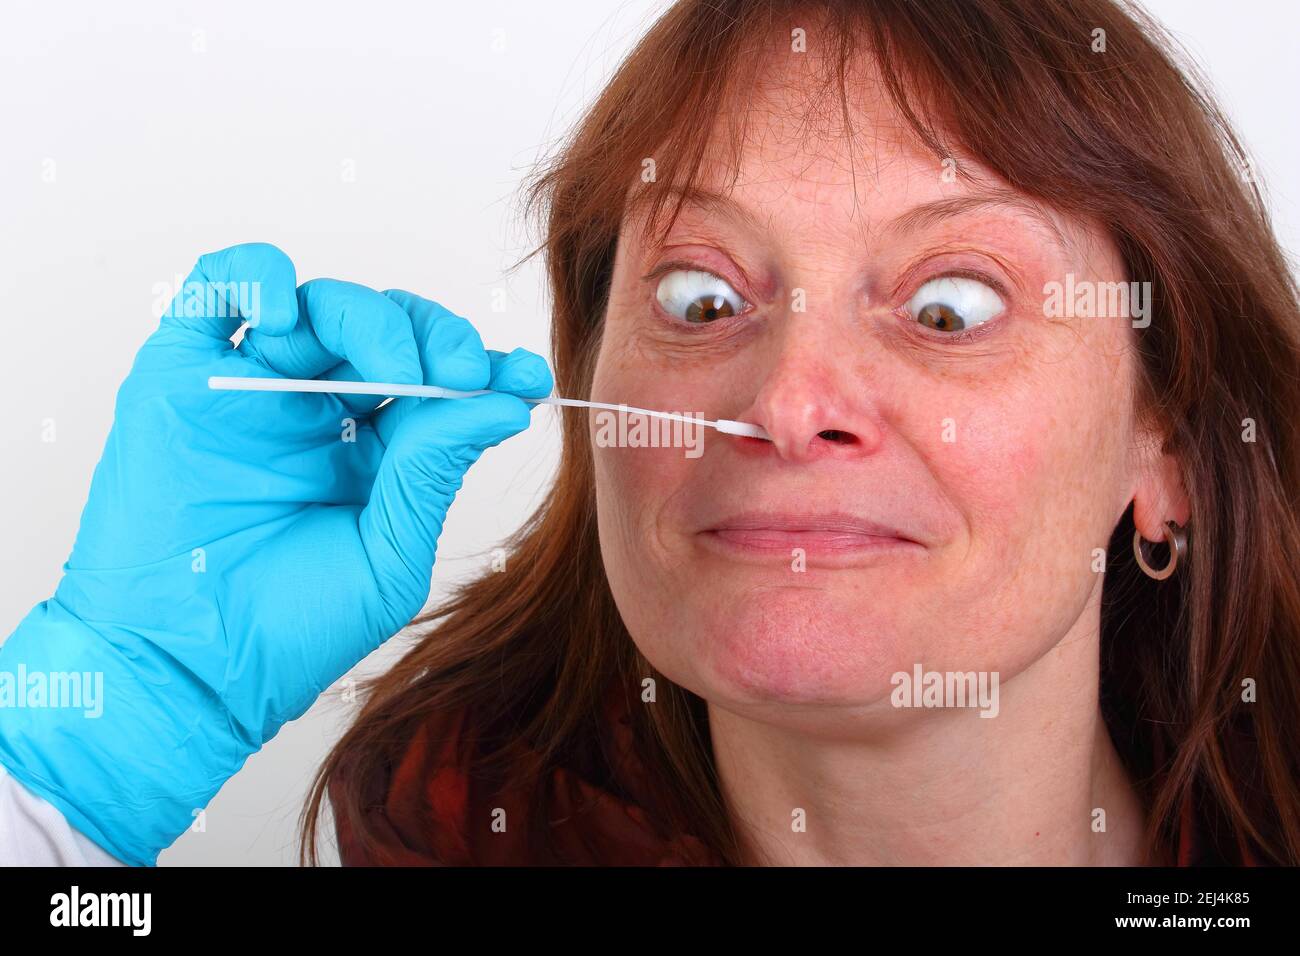 Covid 19 PCR rapid test, Corona, woman being tested nasopharyngeally, fun picture of self test Stock Photo